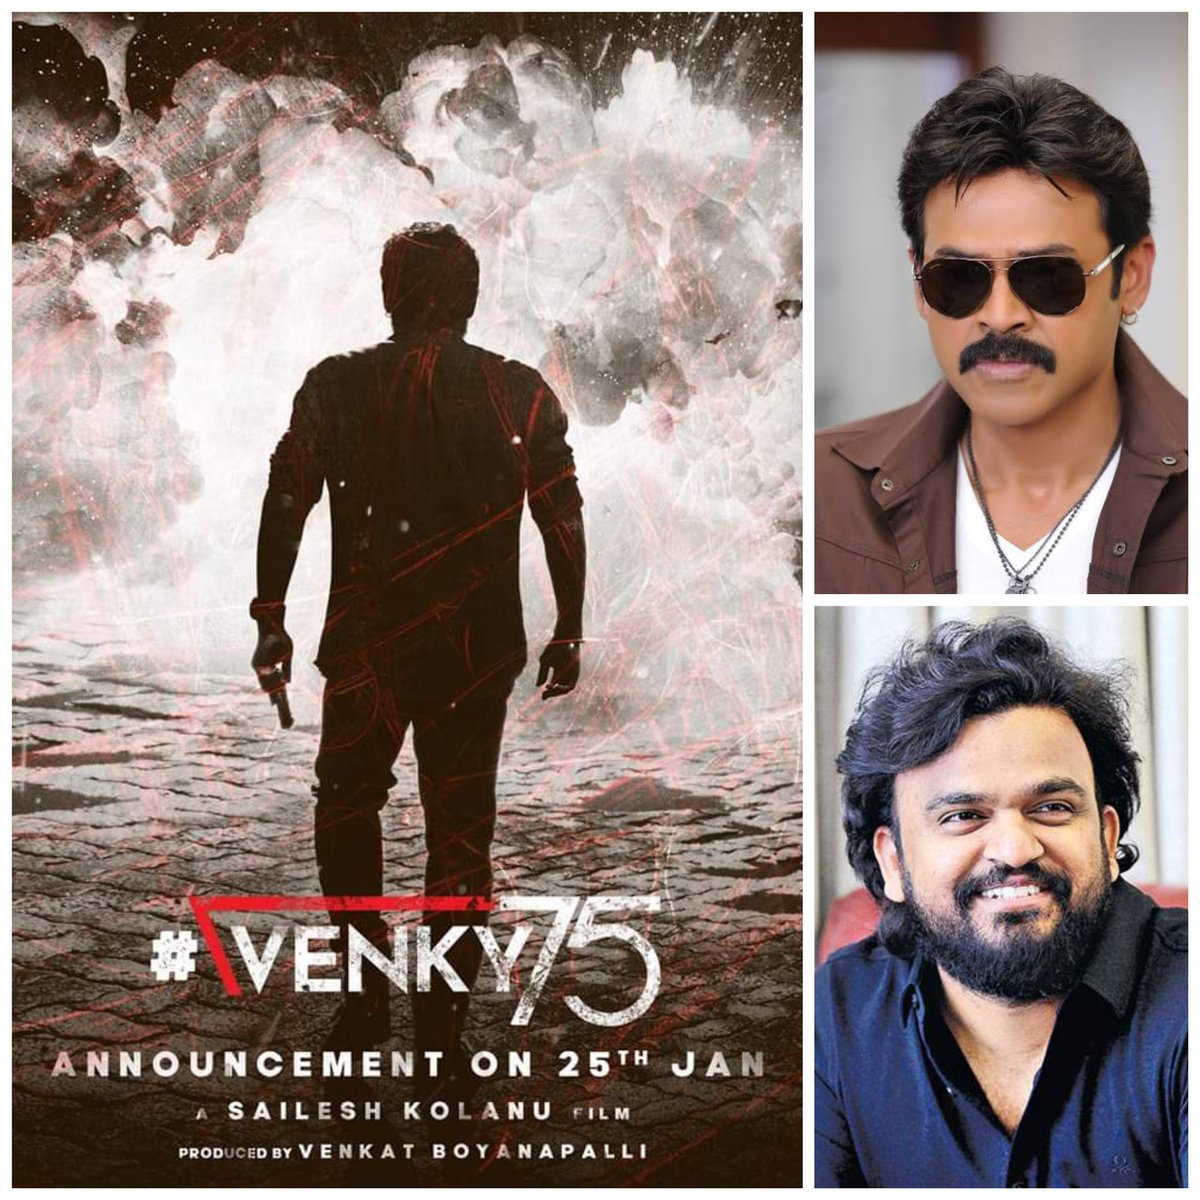 As expected, the most awaited landmark film from #TeluguFilmIndustry #Venky75 will be a unique action entertainer directed by #SaileshKolanu !! A promising, interesting and hype film from #VenkateshDaggubati after a long gap.